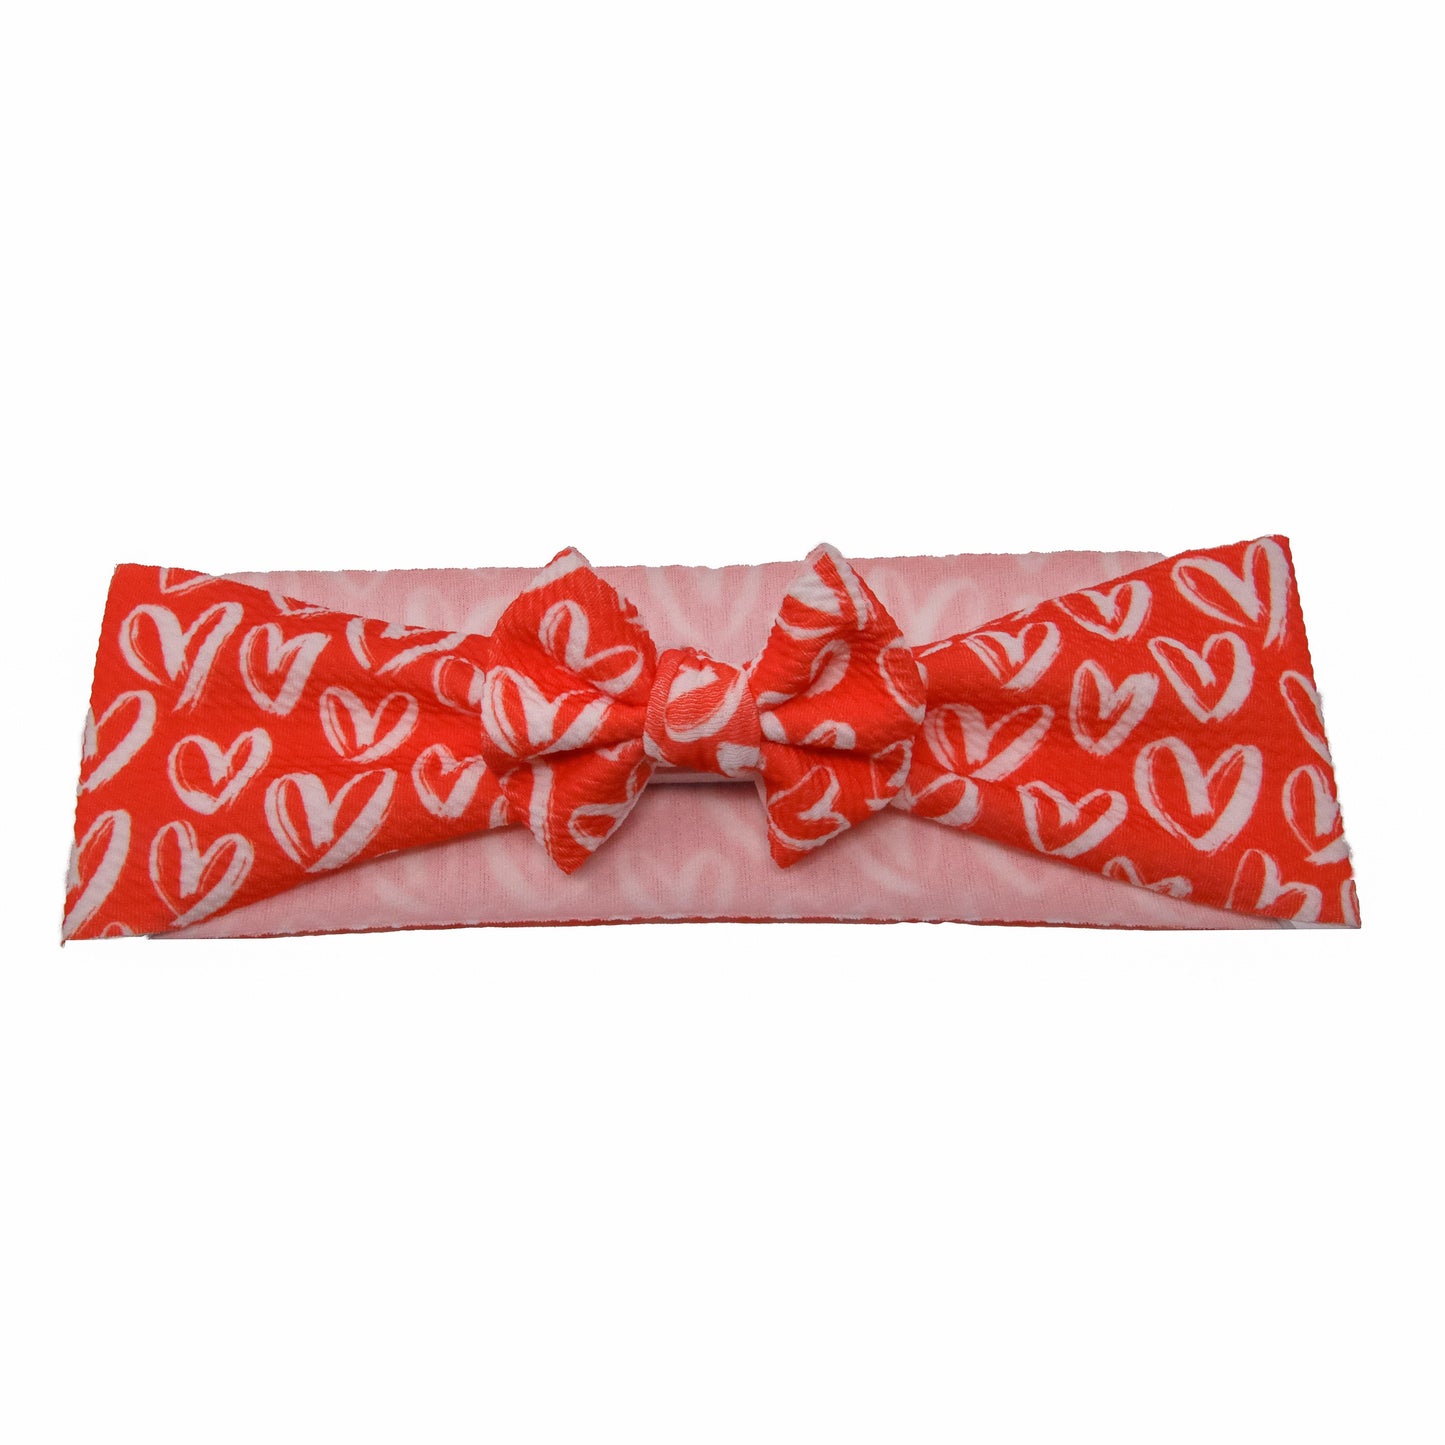 White Hearts on Red Fabric Bow Headwrap 3"